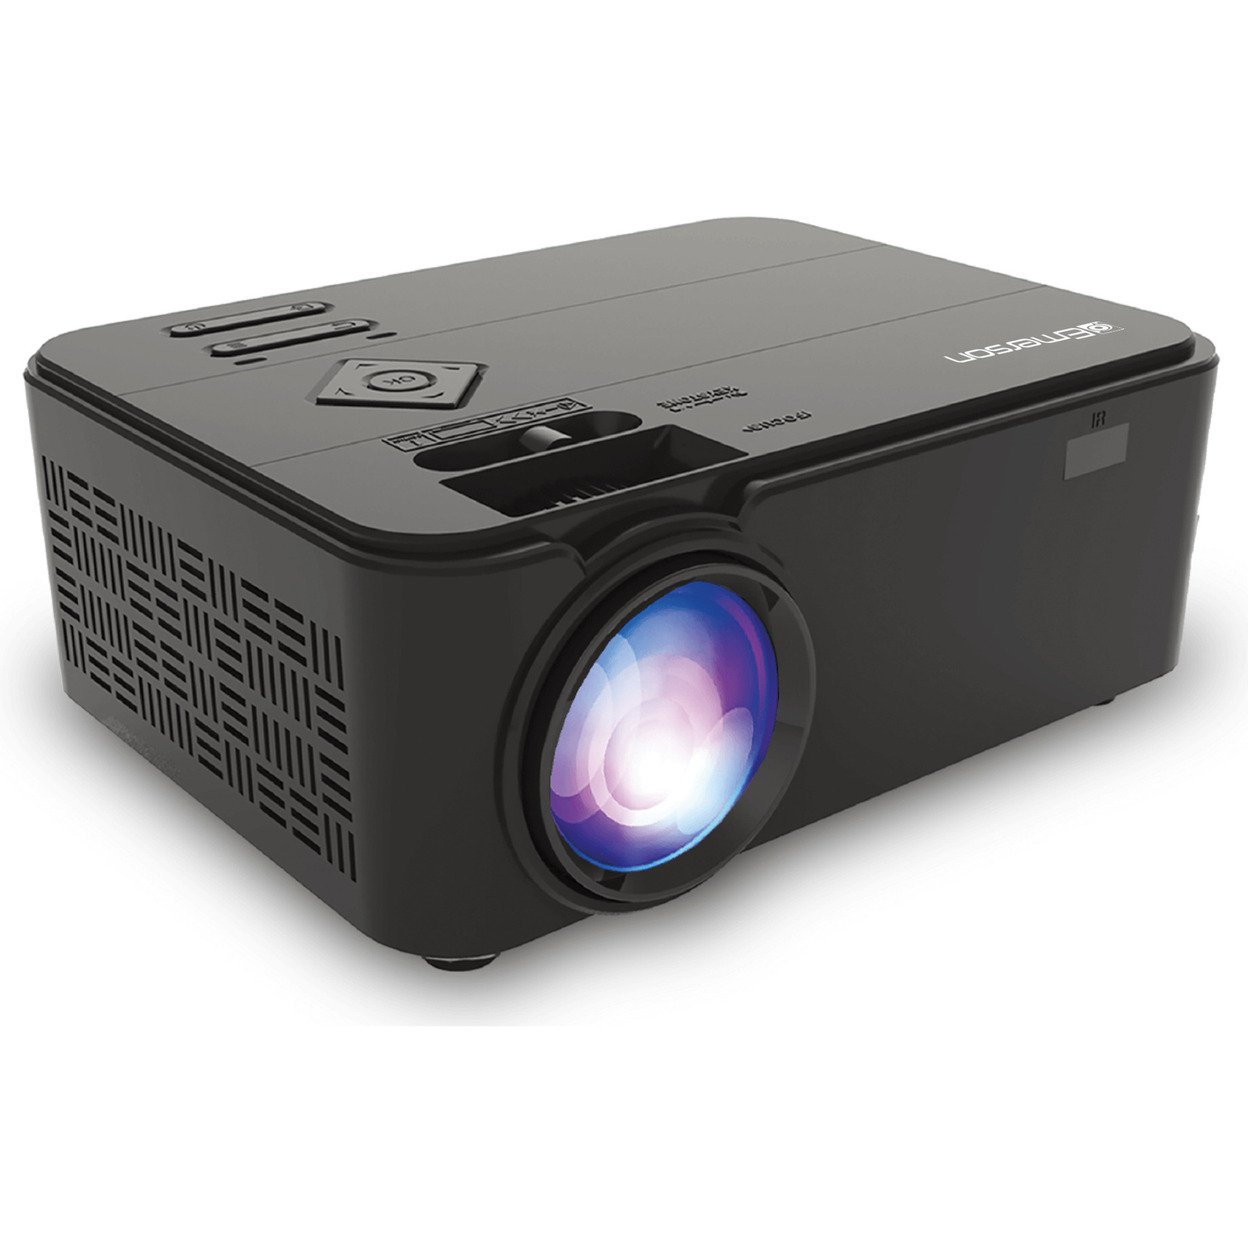 Emerson 150 Home Theater LCD Projector With 720p And Built-In Speaker